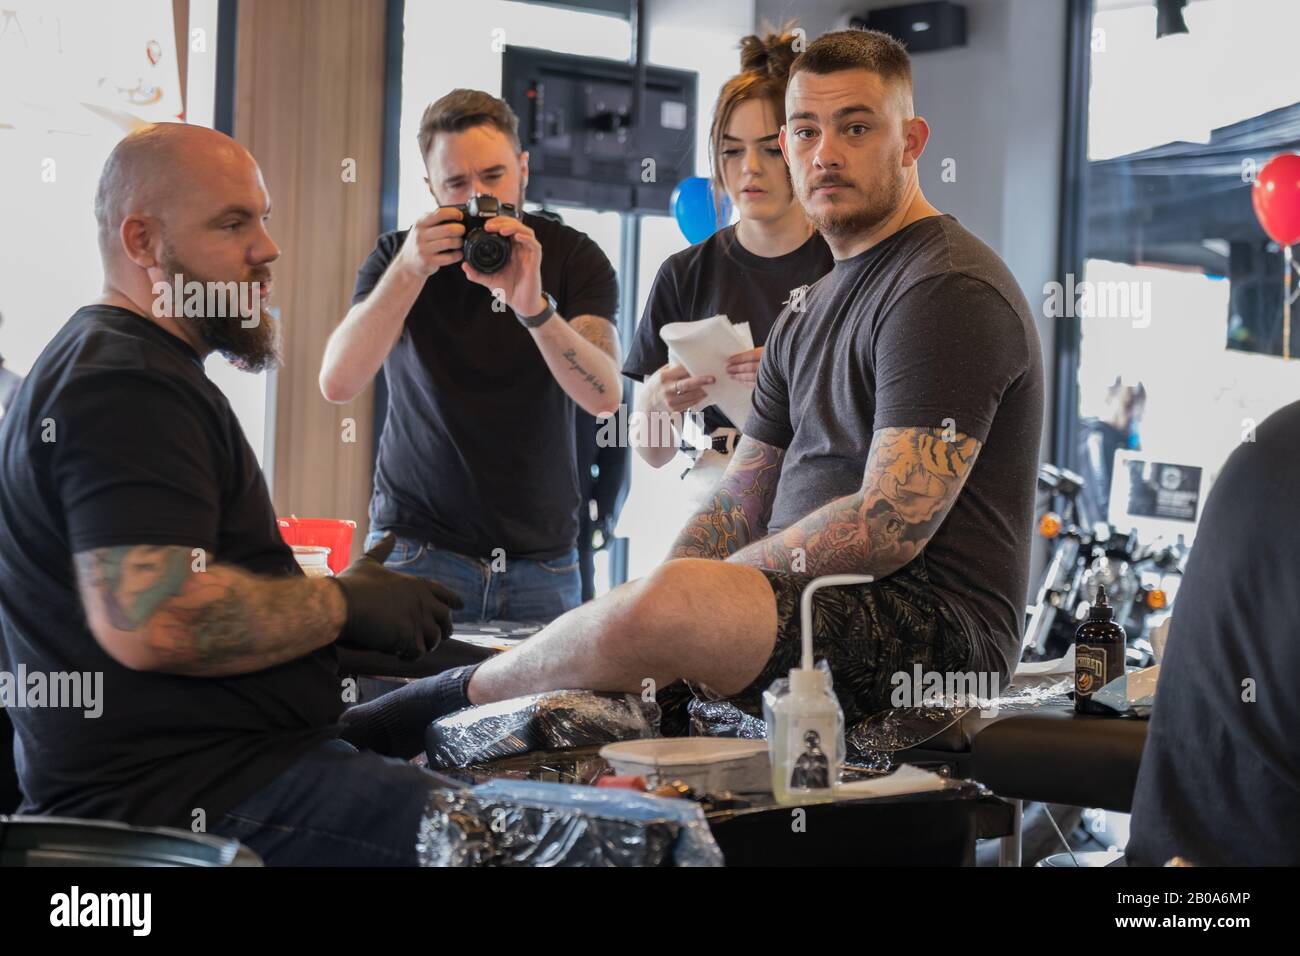 Man getting a Tattoo at Harley-Davidson Reading Berkshire England with onlookers Stock Photo